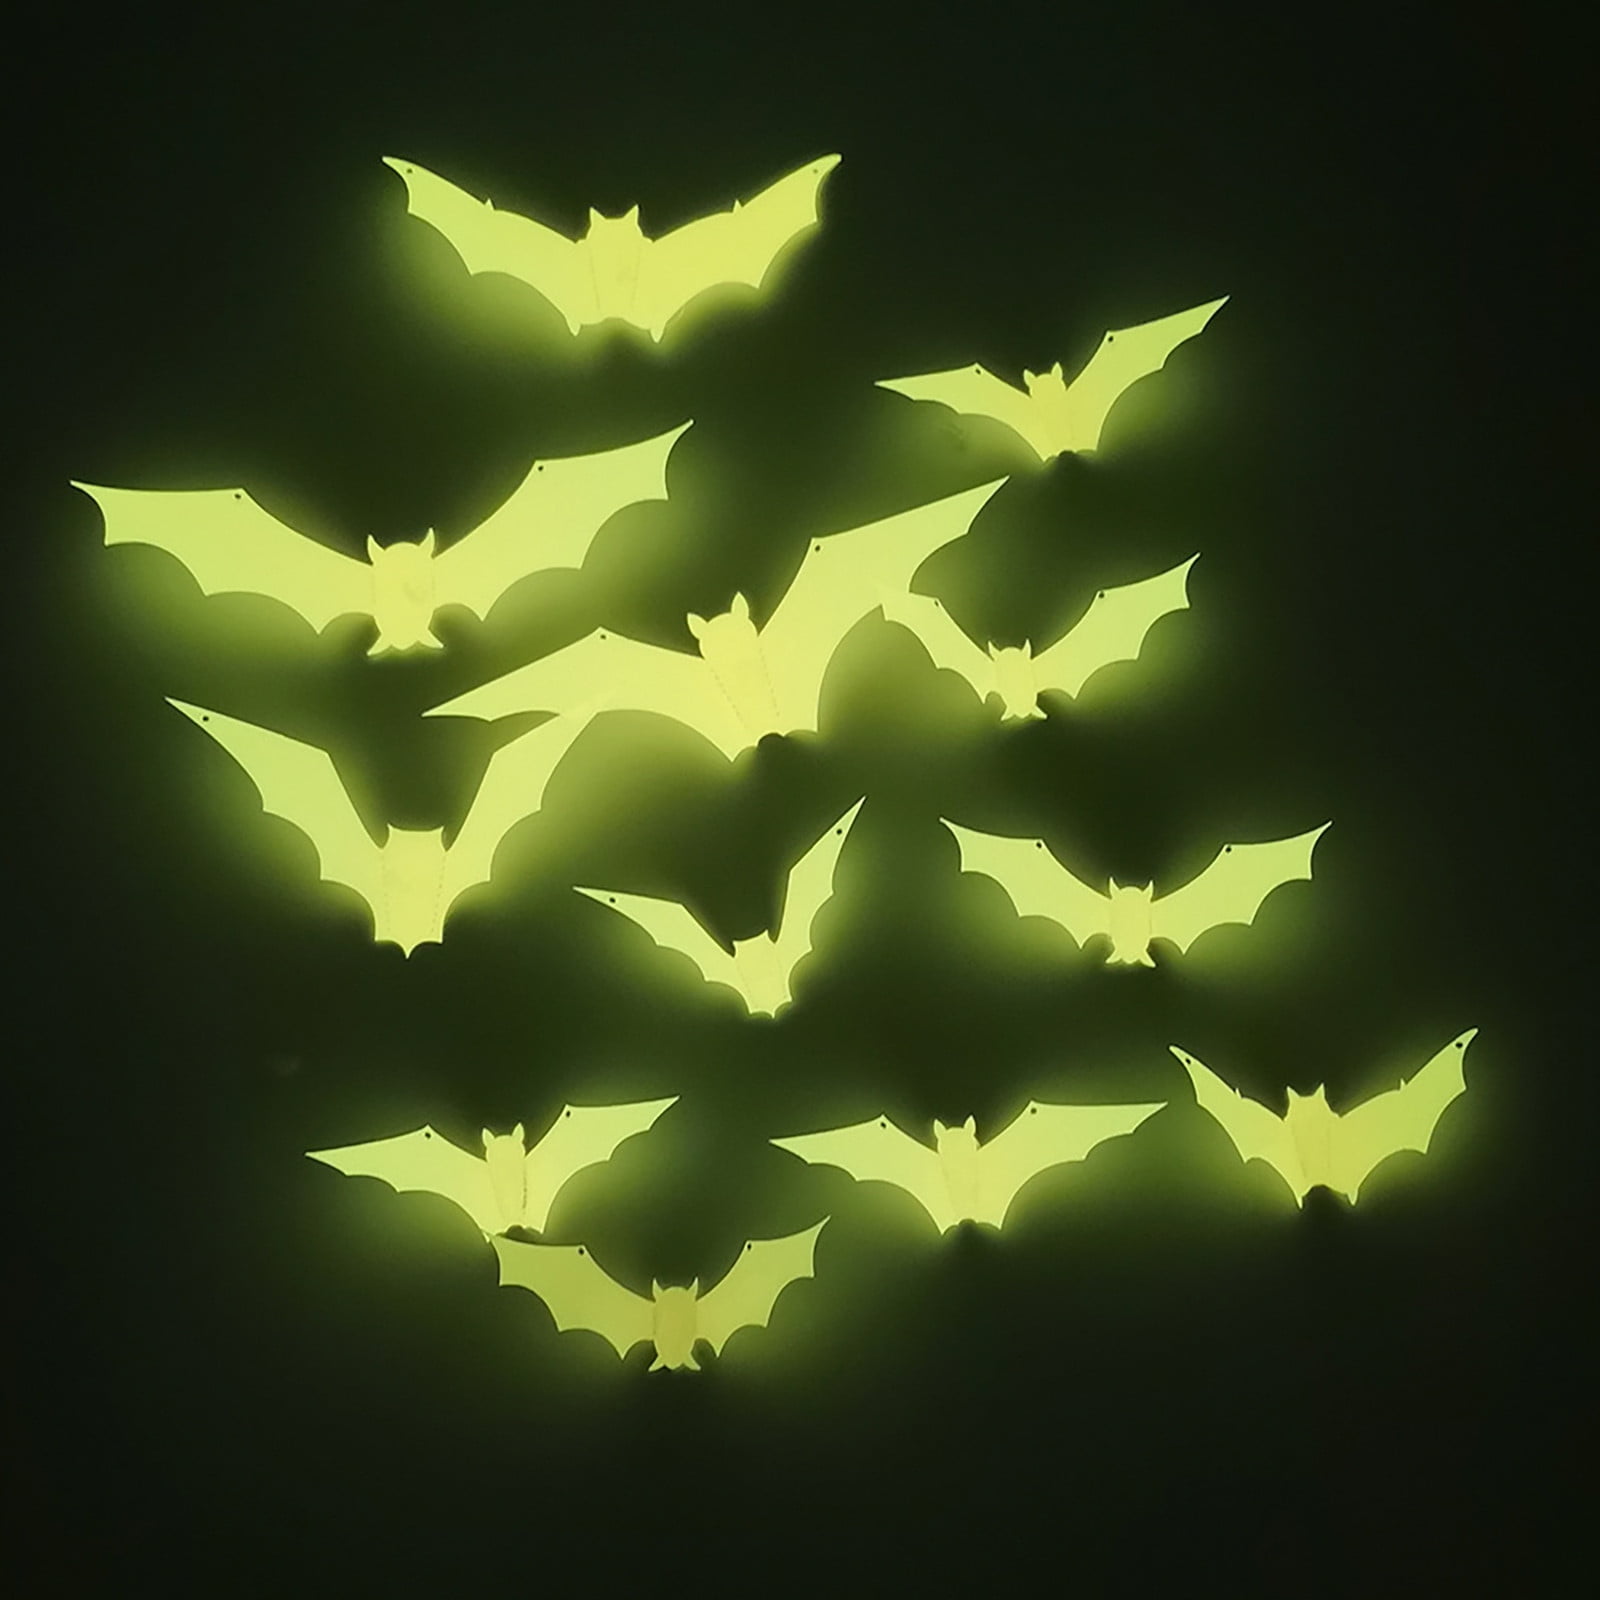 20 Bat HD Wallpapers and Backgrounds